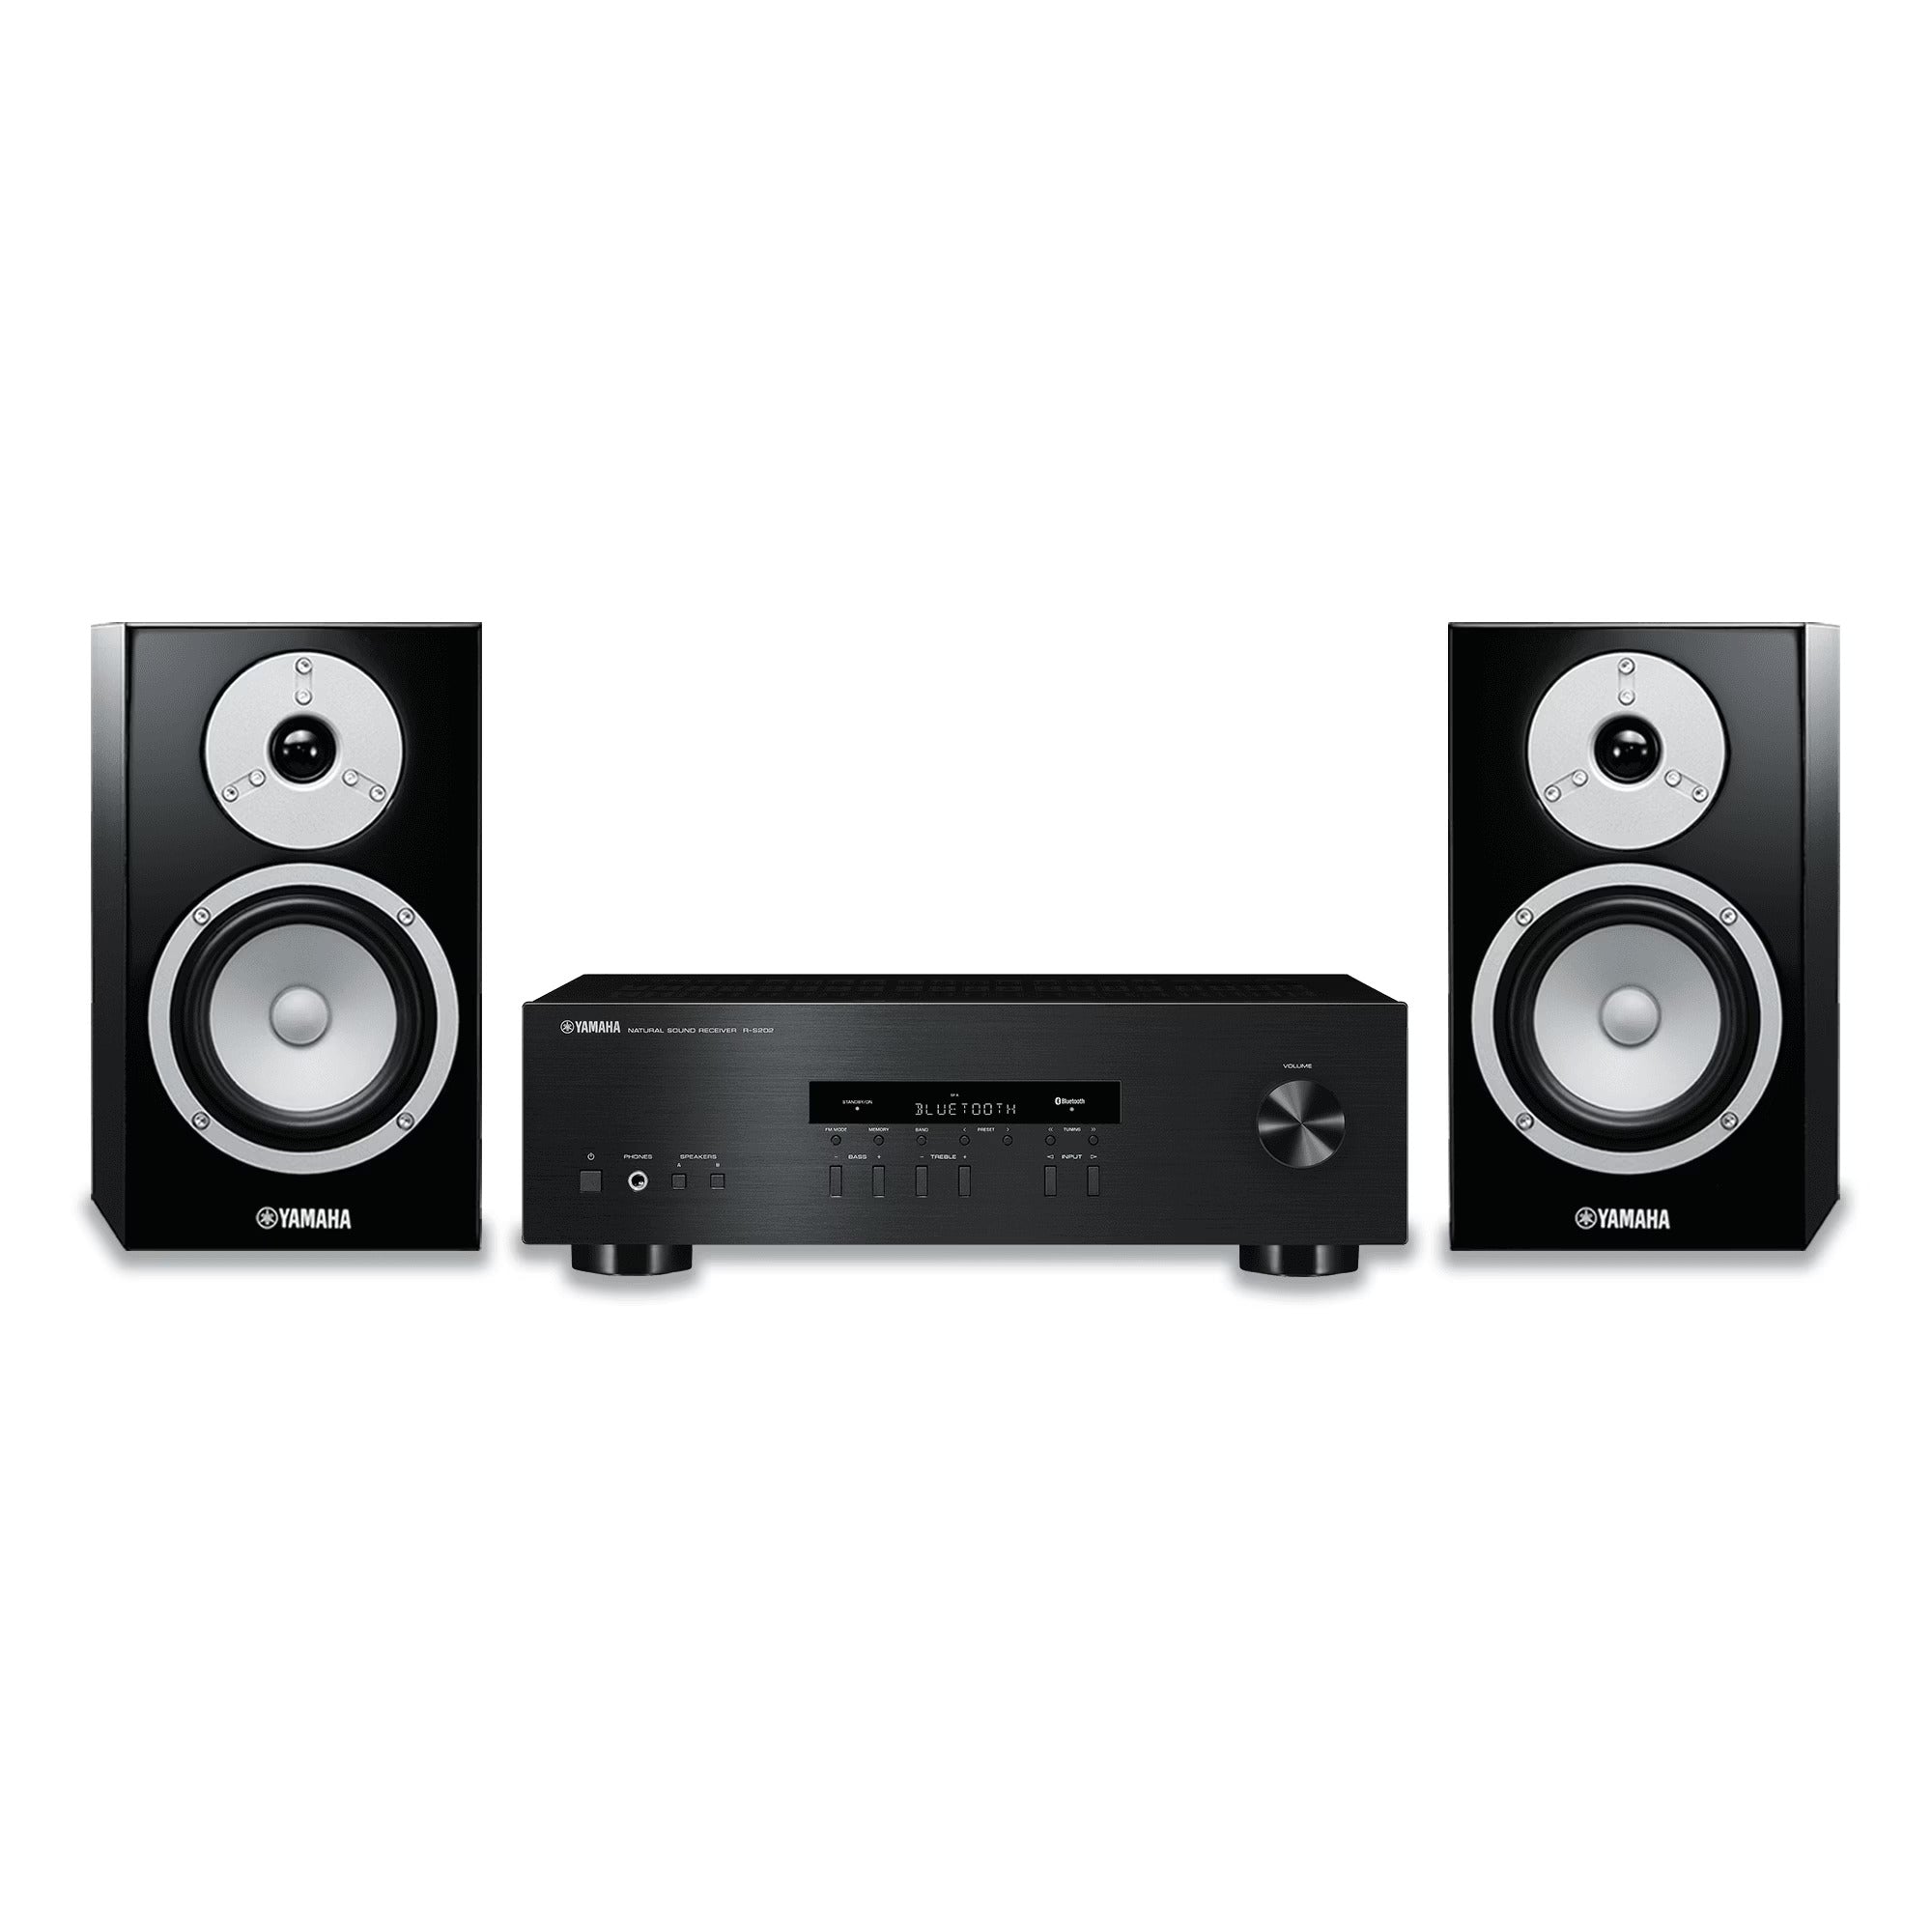 Yamaha HiFi Package #1 - R-S202 2-Channel Receiver and NS-BP301 Bookshelf Speakers - pair